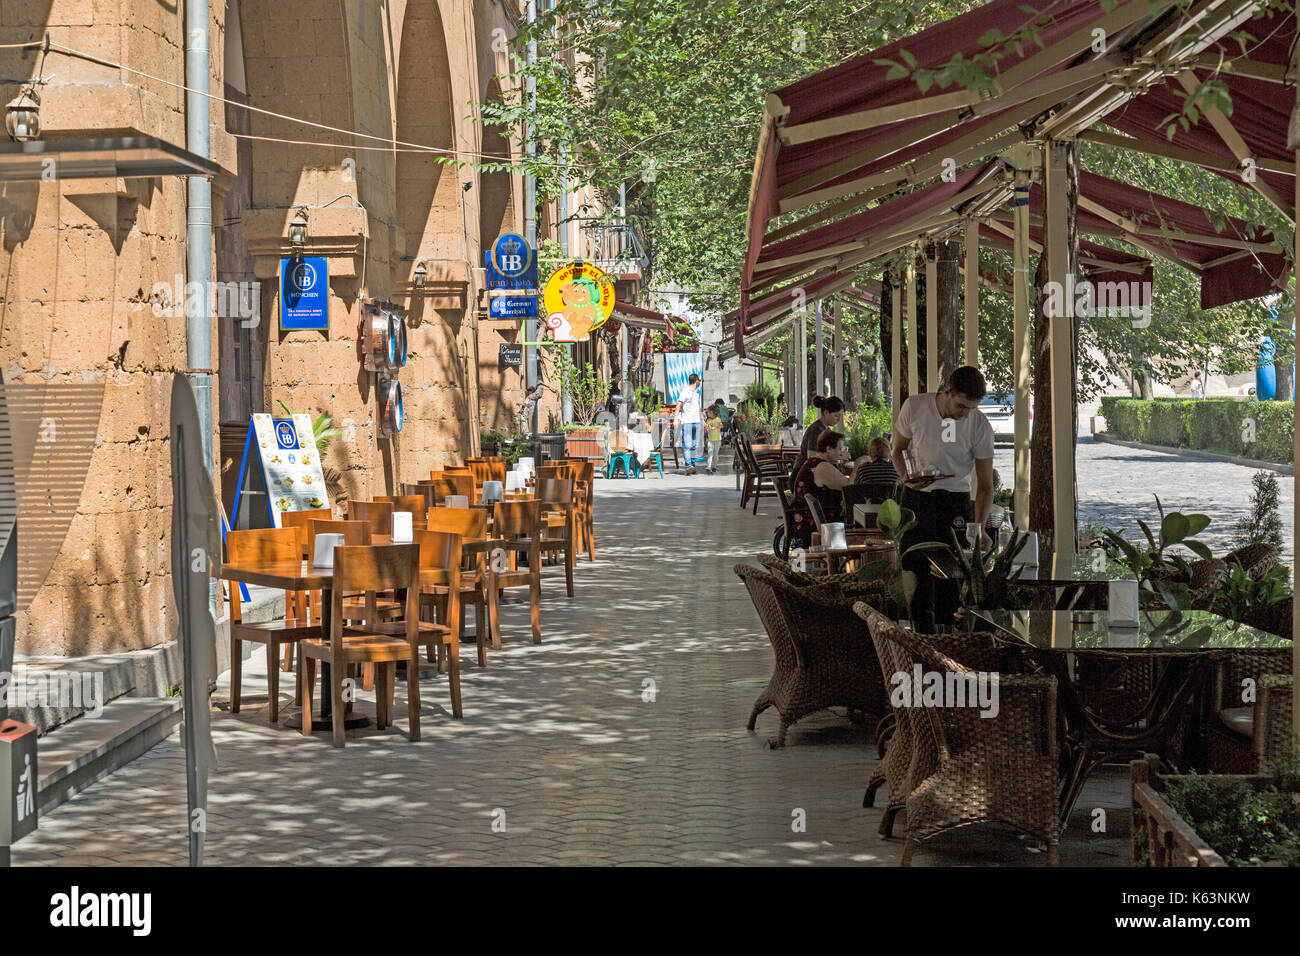 Street in Yerevan, Armenia,with cafes and restaurants. Old buildings and trees in the street. Stock Photo